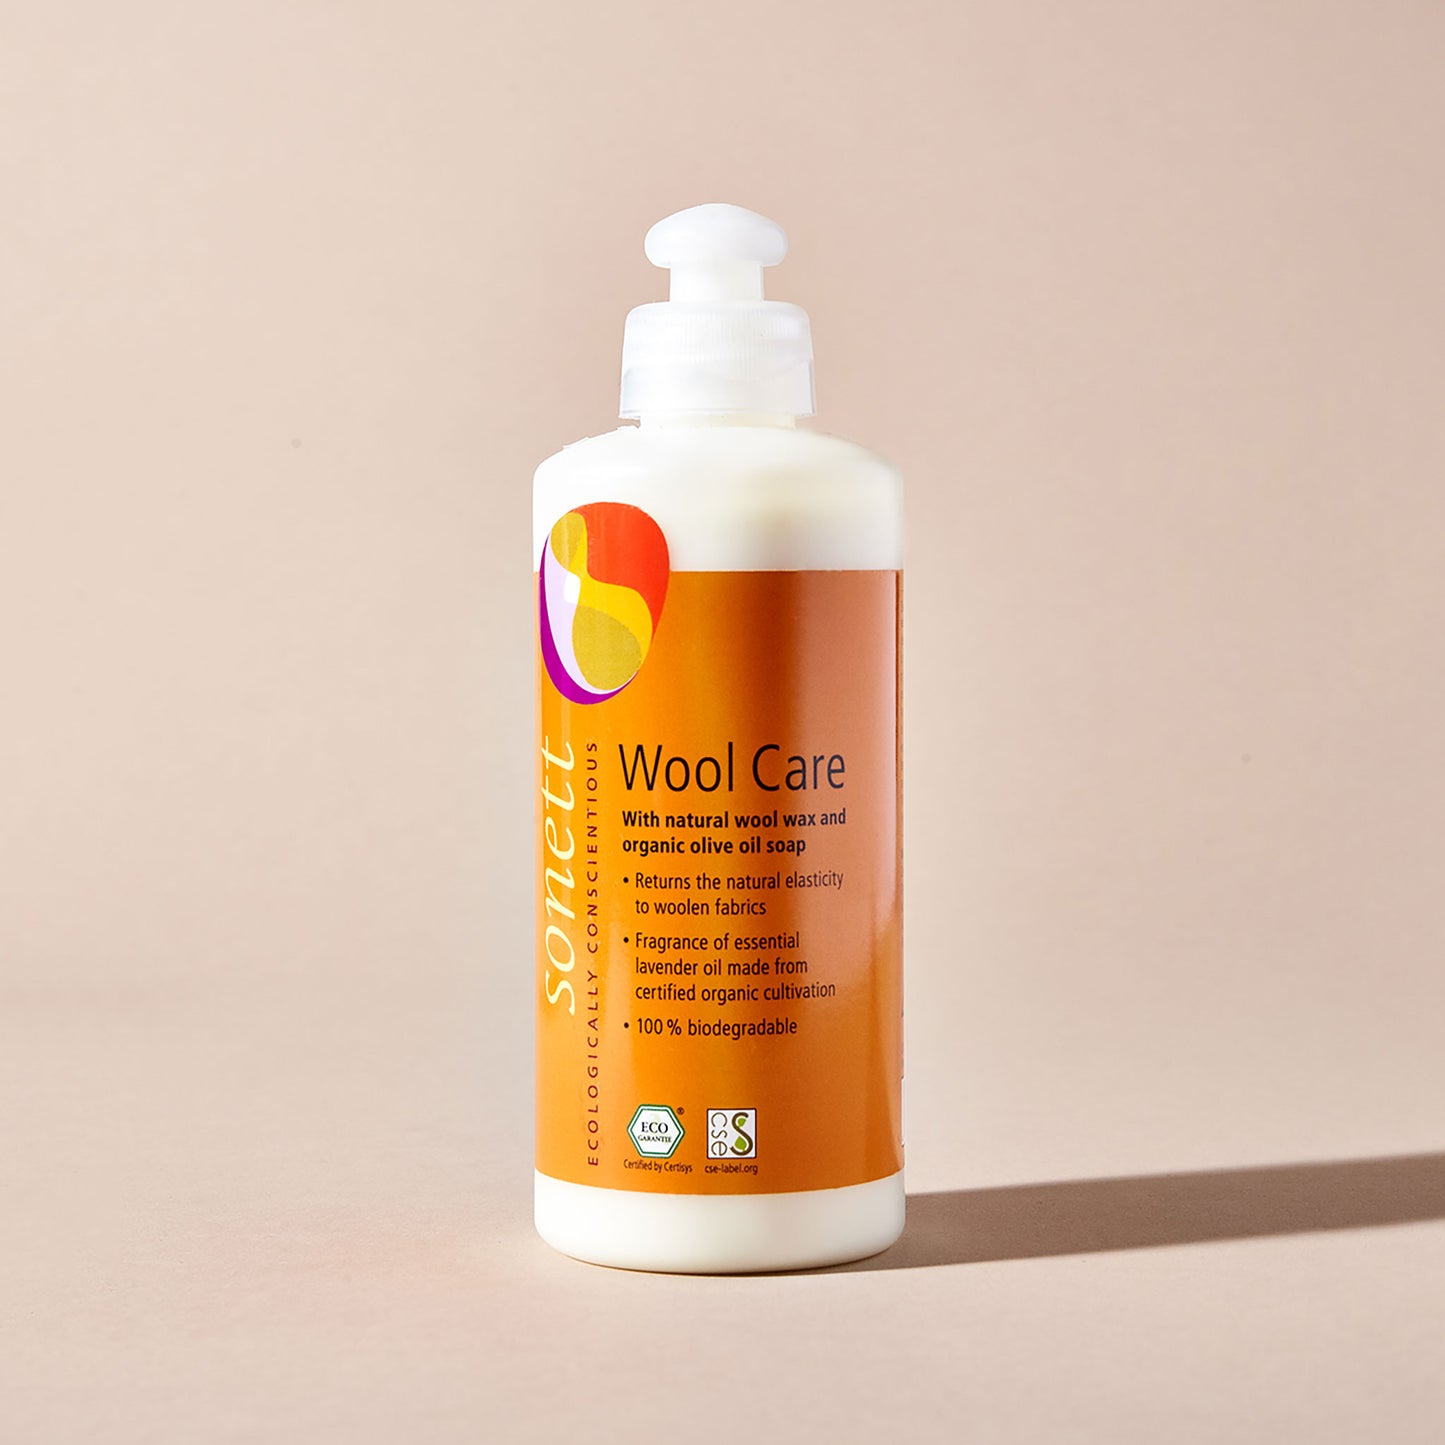 Sonett eco-friendly wool conditioner in a white squirt bottle with an orange label, displayed with a beige backdrop